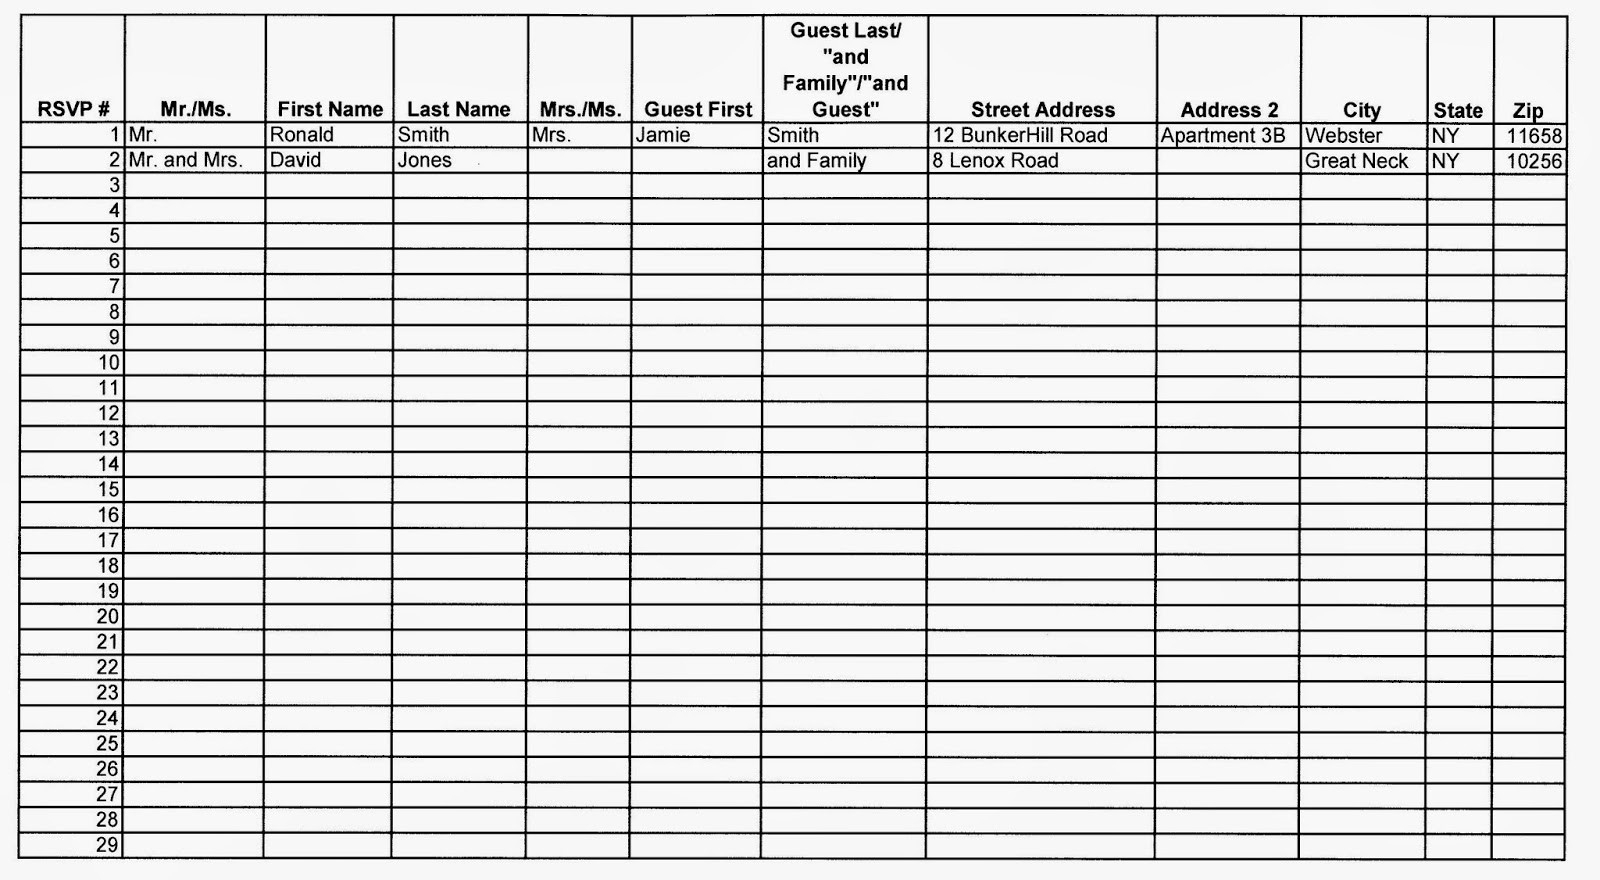 Shawn Rabideau Events And Design: Organizing Your Guest List-Event Guest List Template Excel